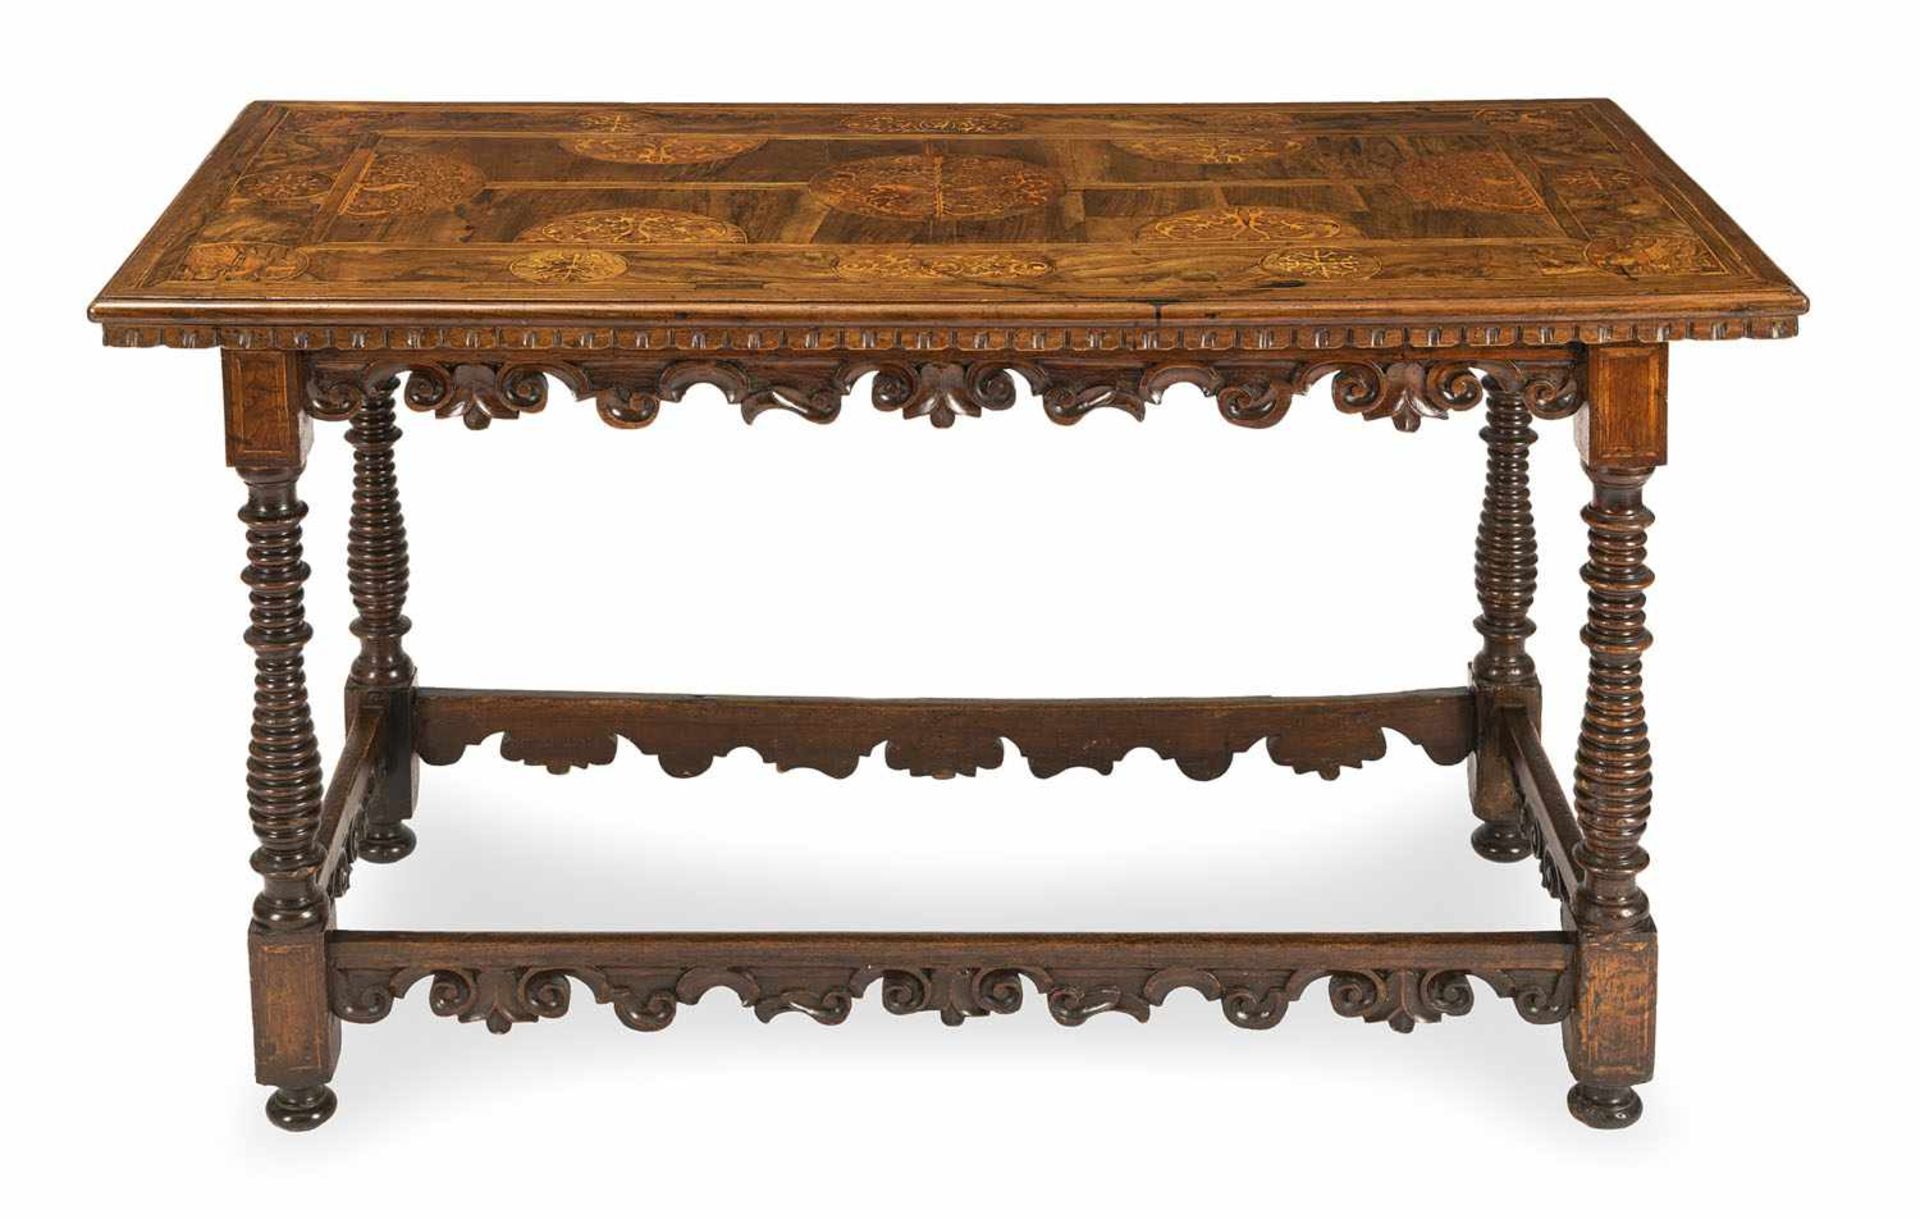 A Baroque walnut a.o. table, 18th/19th ct. Rest. Add. Signs of aging.